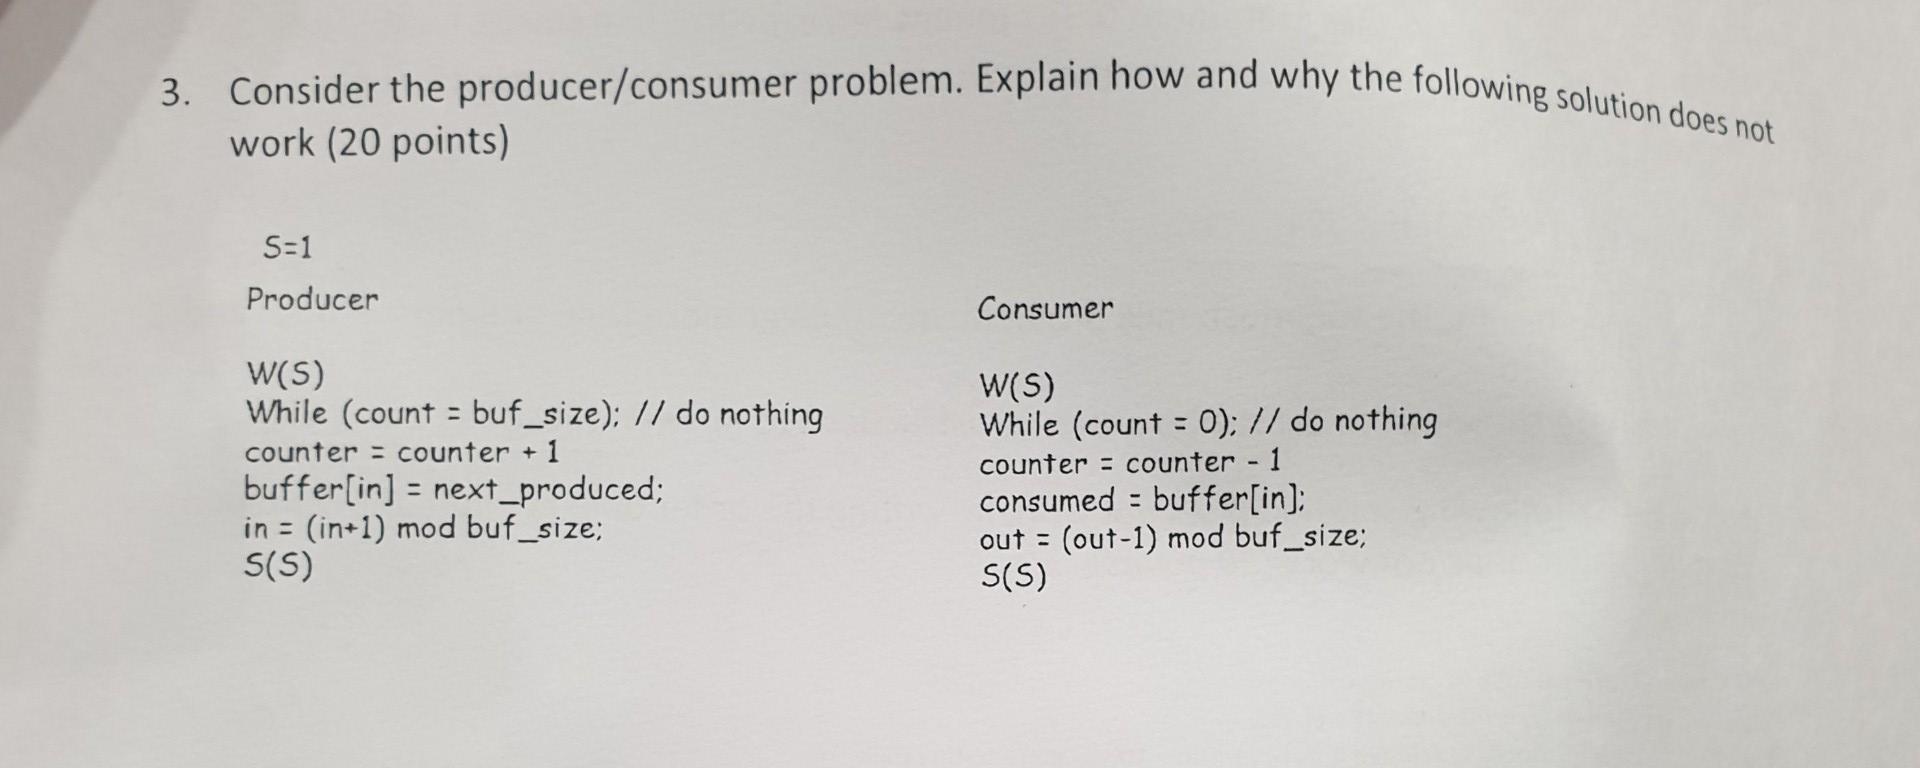 3. Consider the producer/consumer problem. Explain how and why the following solution does not work (20